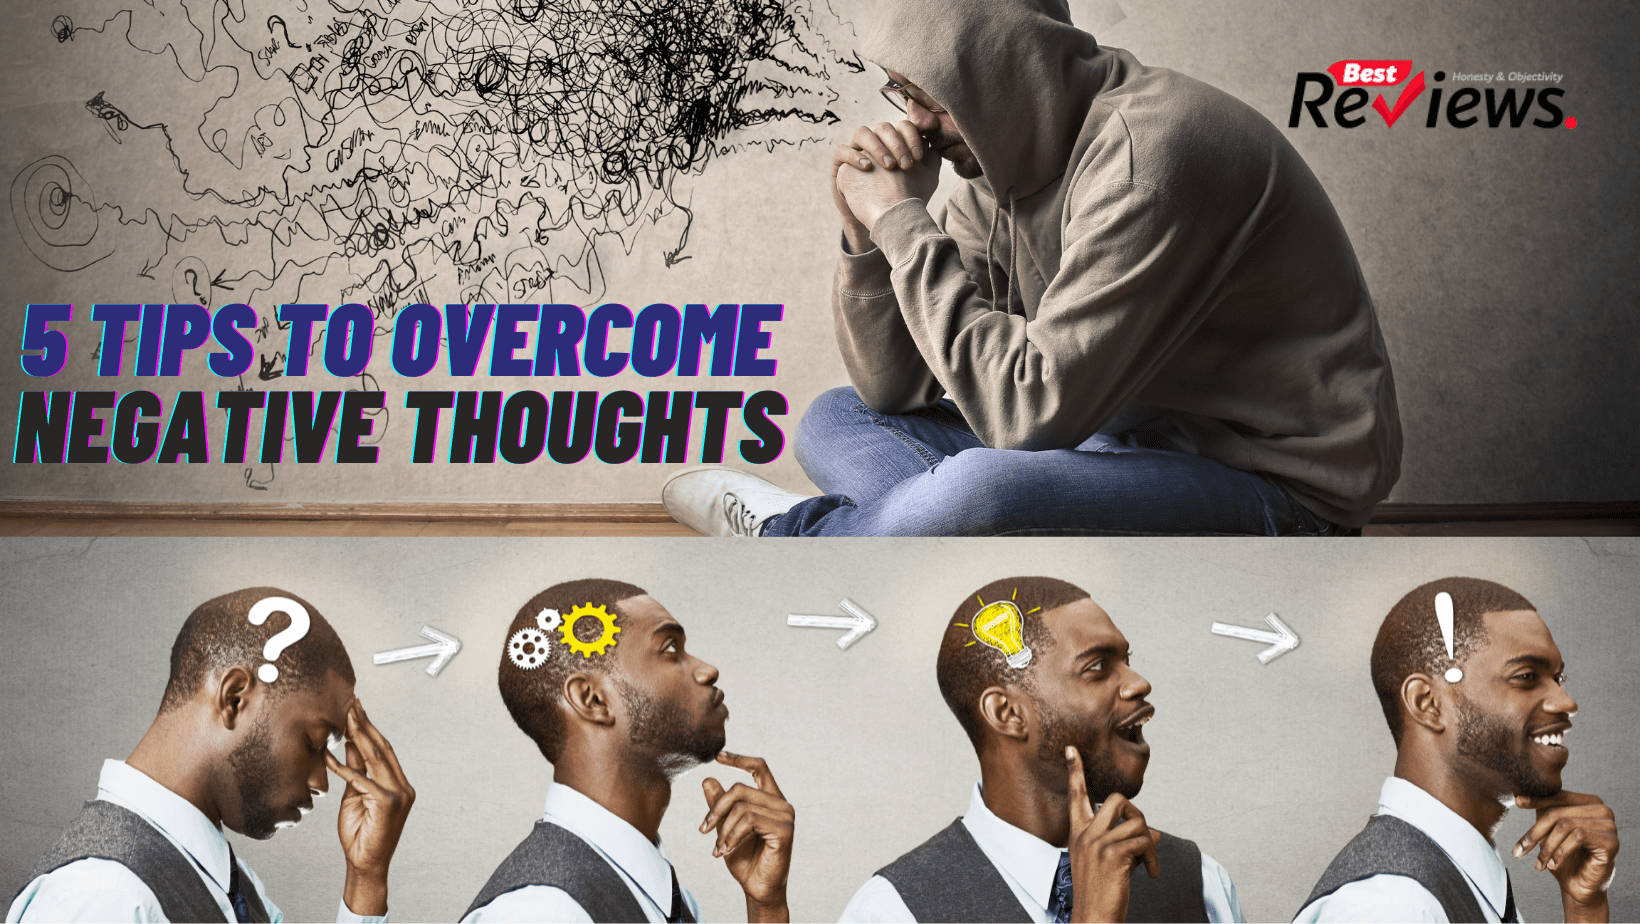 5 Tips to Overcome Negative Thoughts